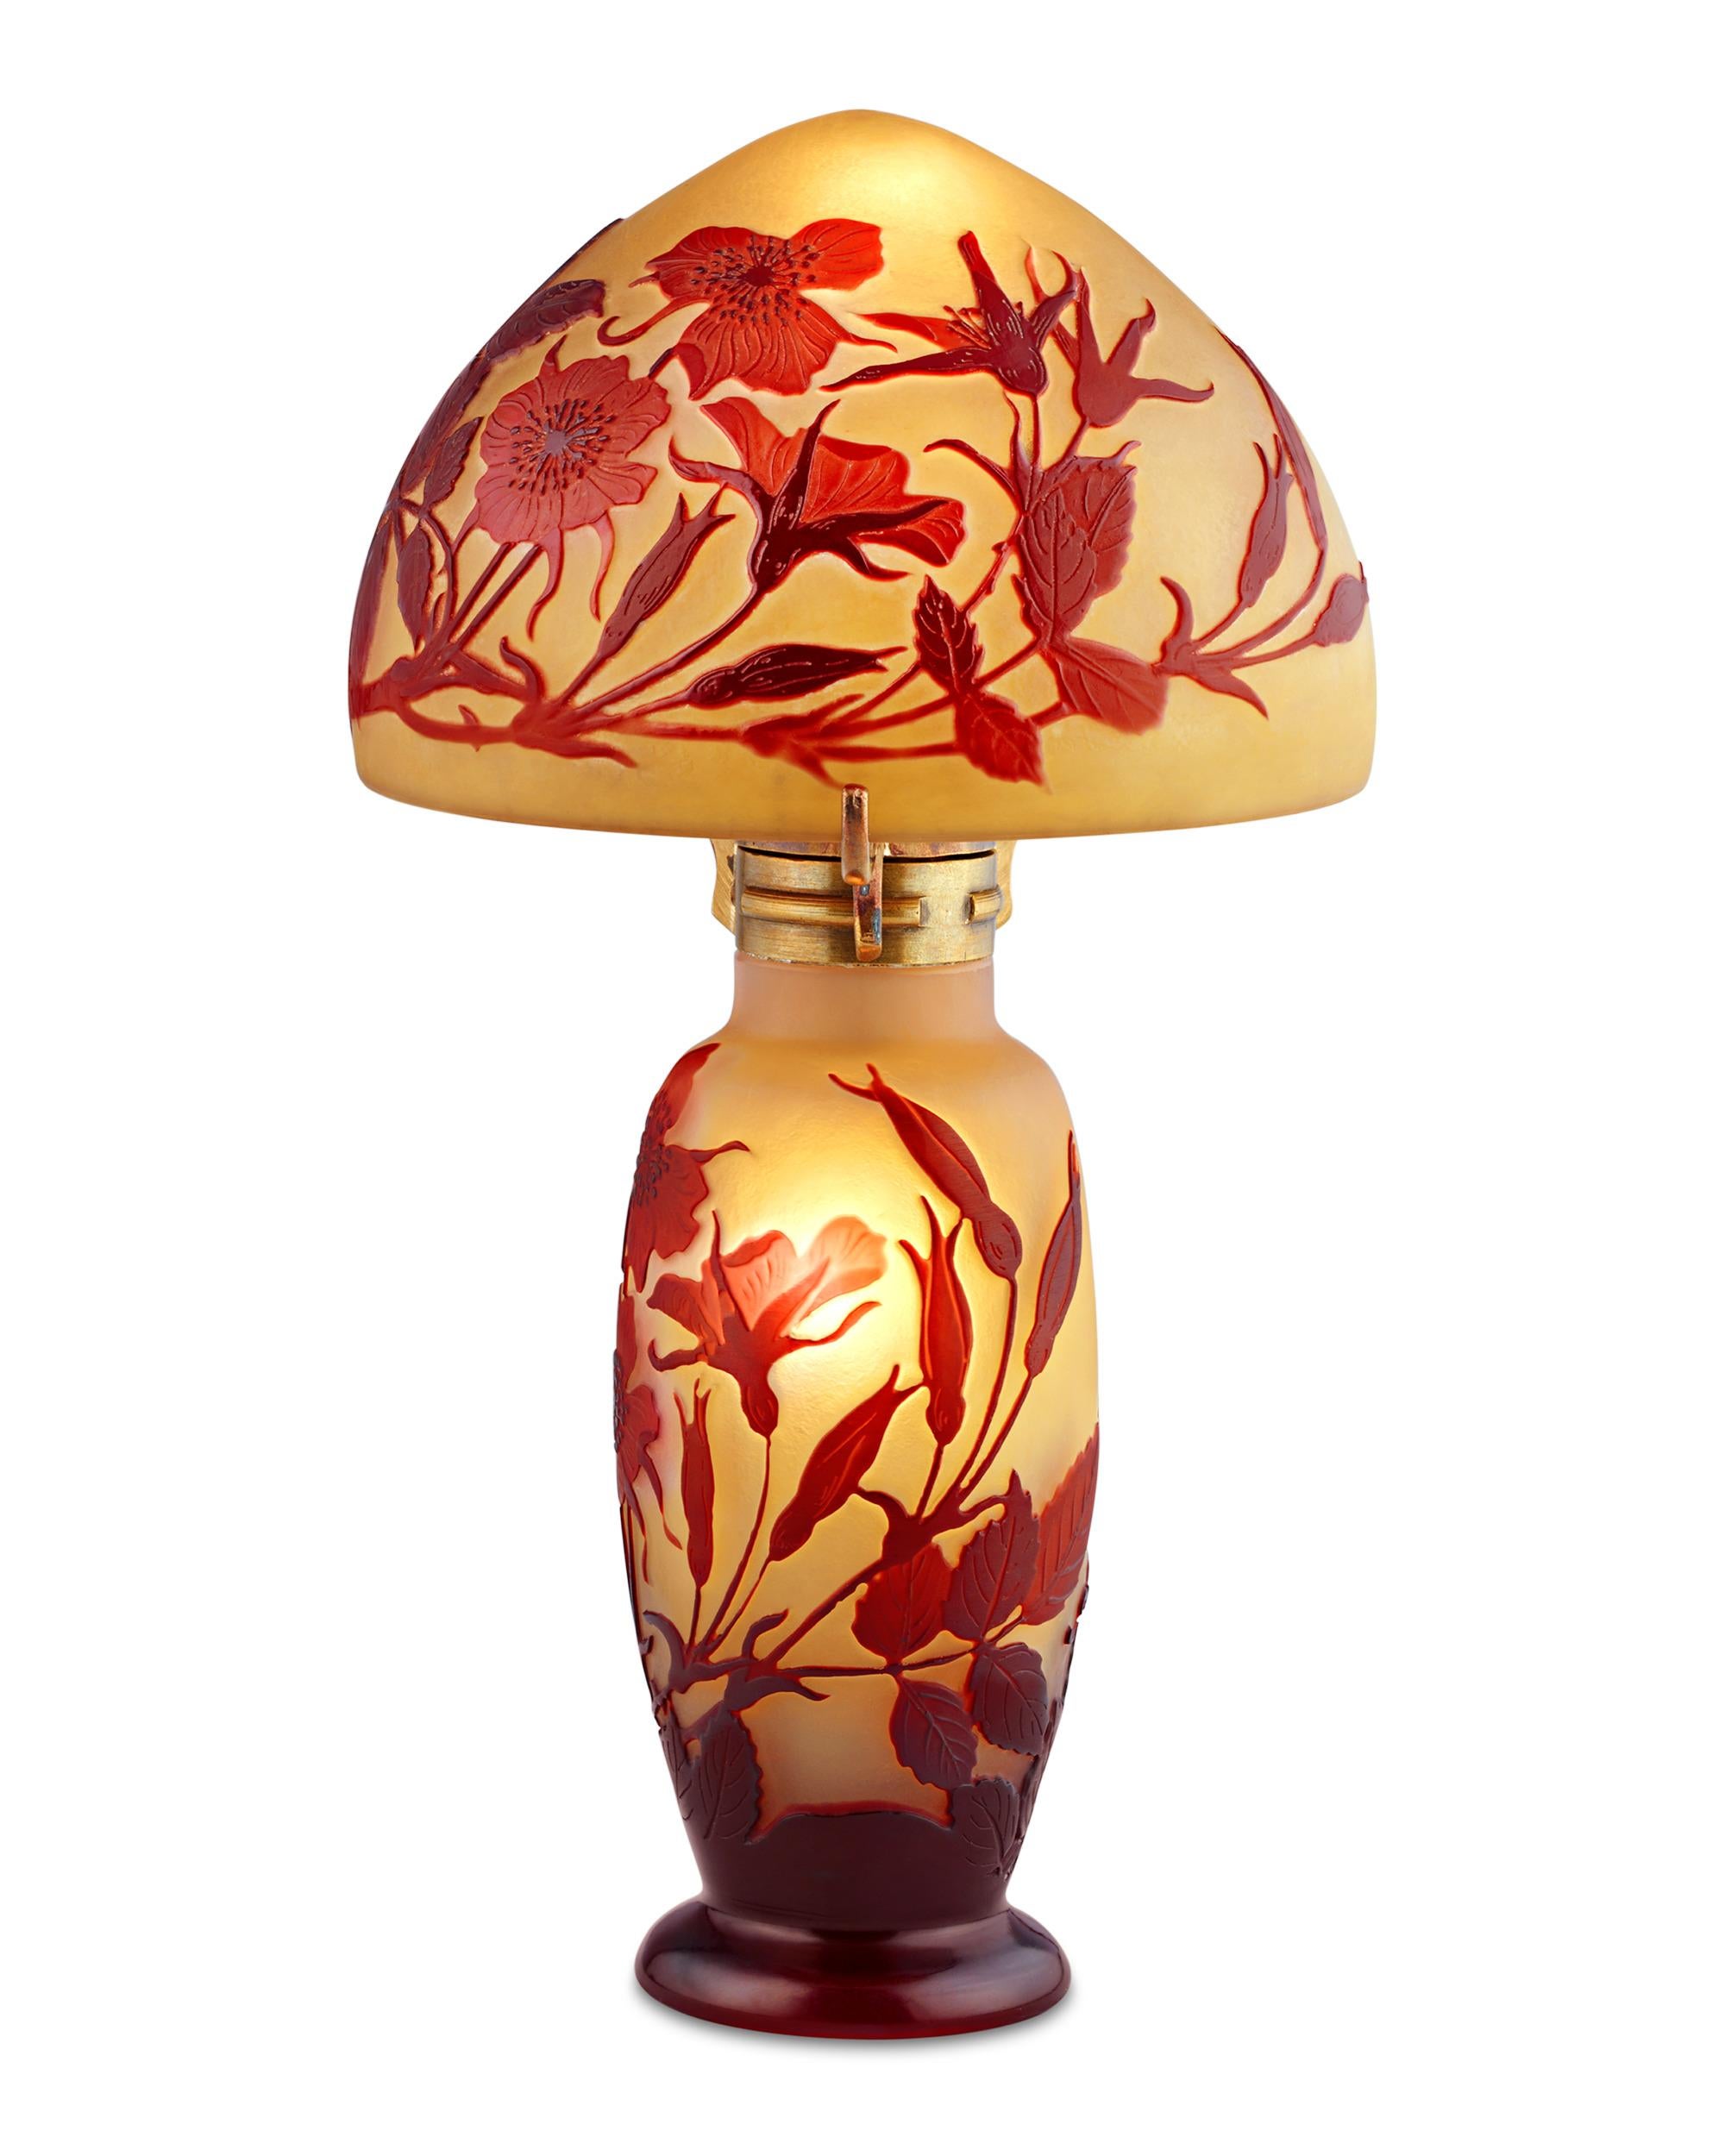 Émile Gallé is one of the most highly regarded names in French glassmaking, and his cameo lamps are among his most coveted creations. Delicately etched with a motif of blossoms and leaves, this example demonstrates Gallé‘s precise execution and his